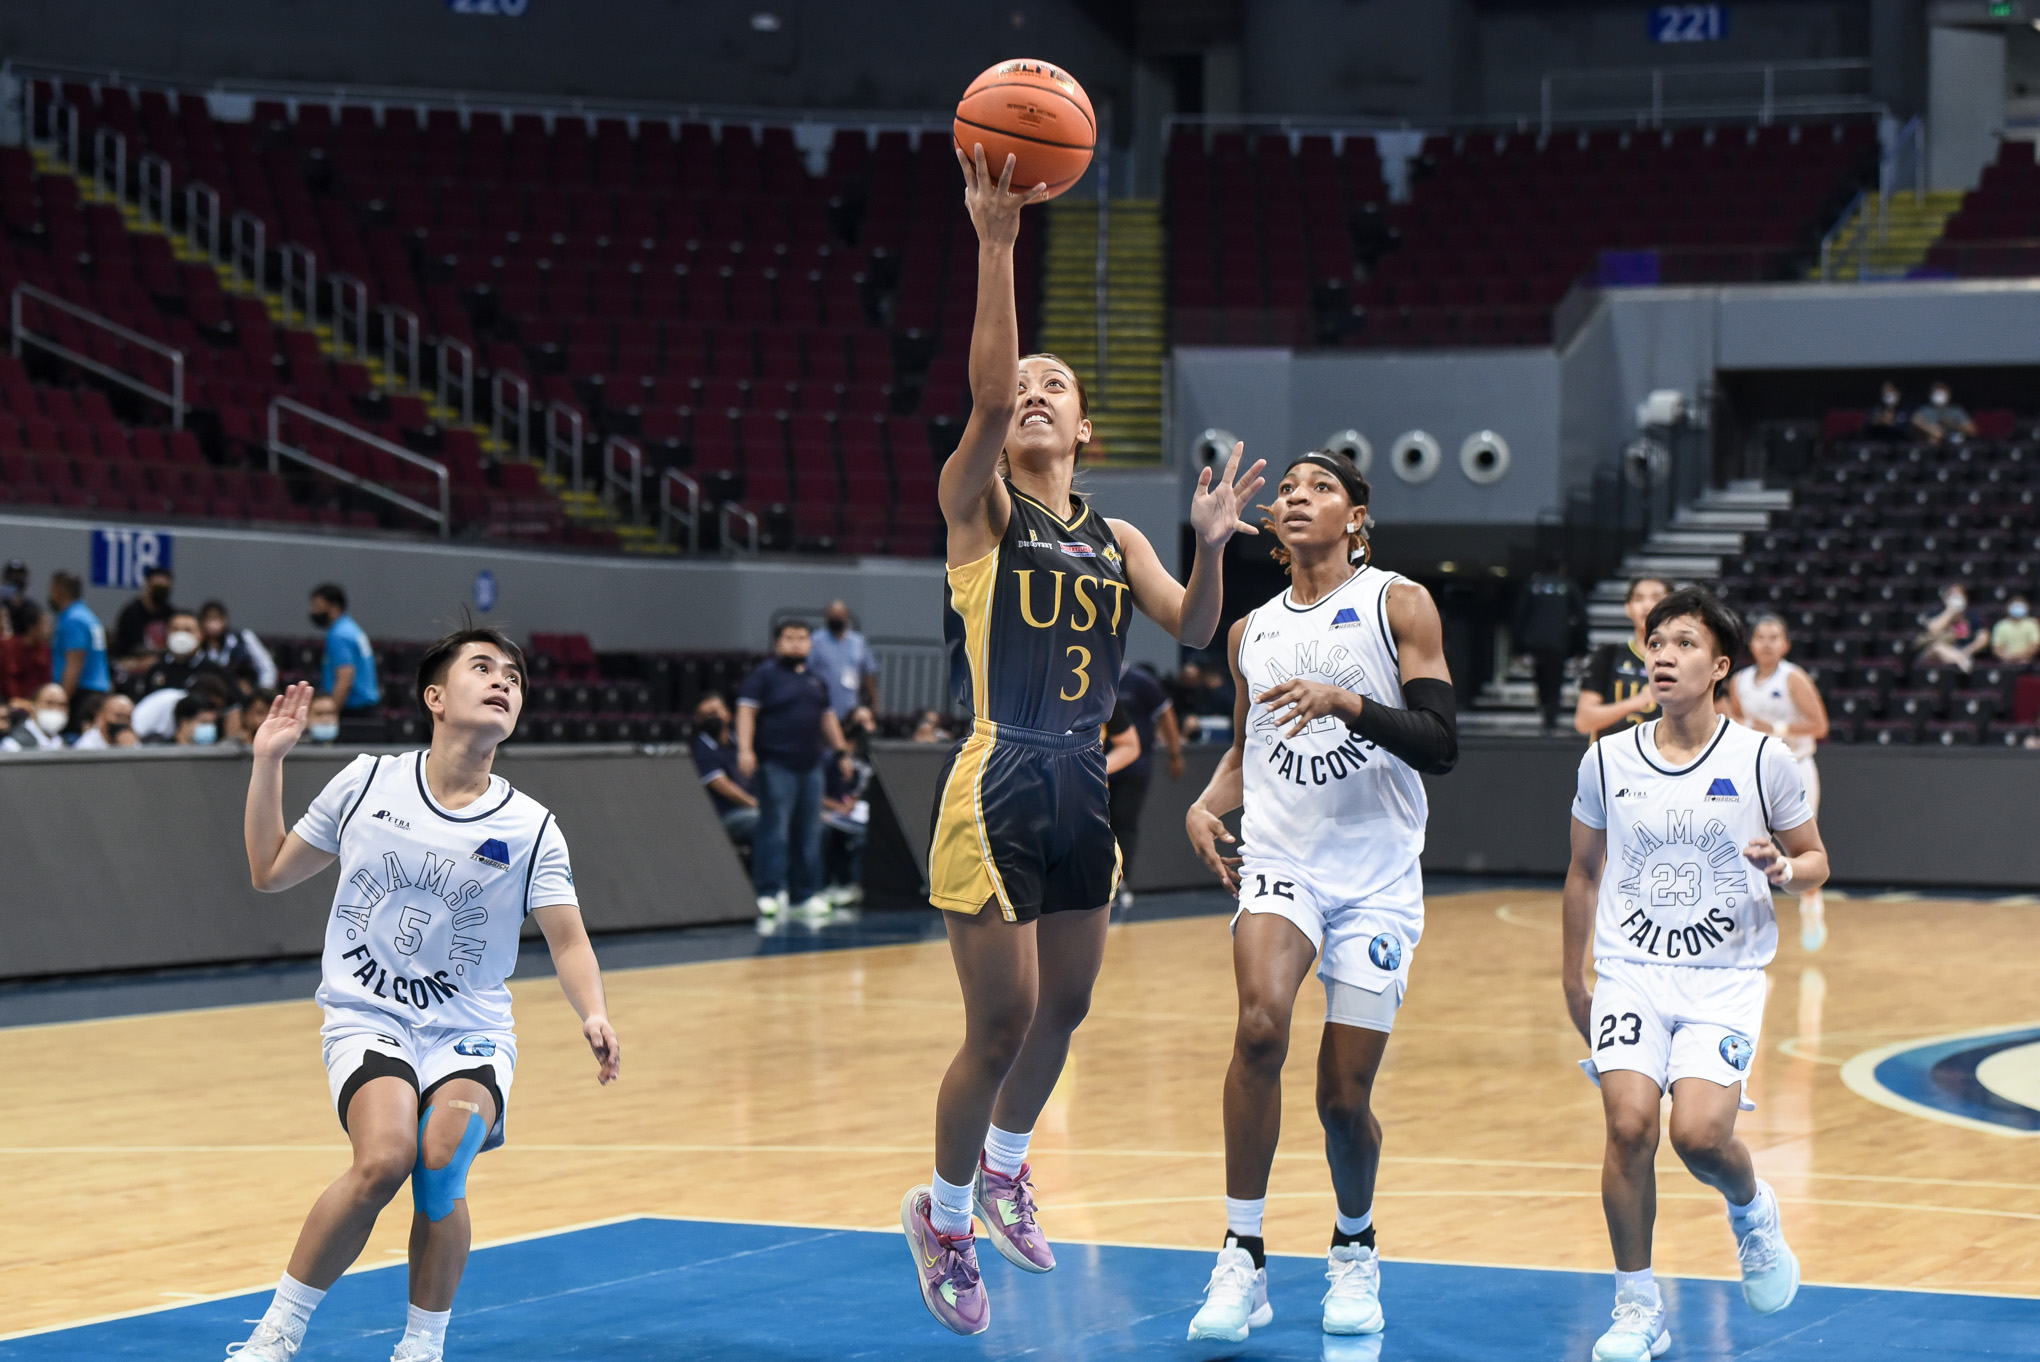 UAAP85-Nikki-Villasin-1 Haydee Ong glad to see Tacatac, Villasin step up as UST only fields 12 players Basketball News UAAP UST  - philippine sports news